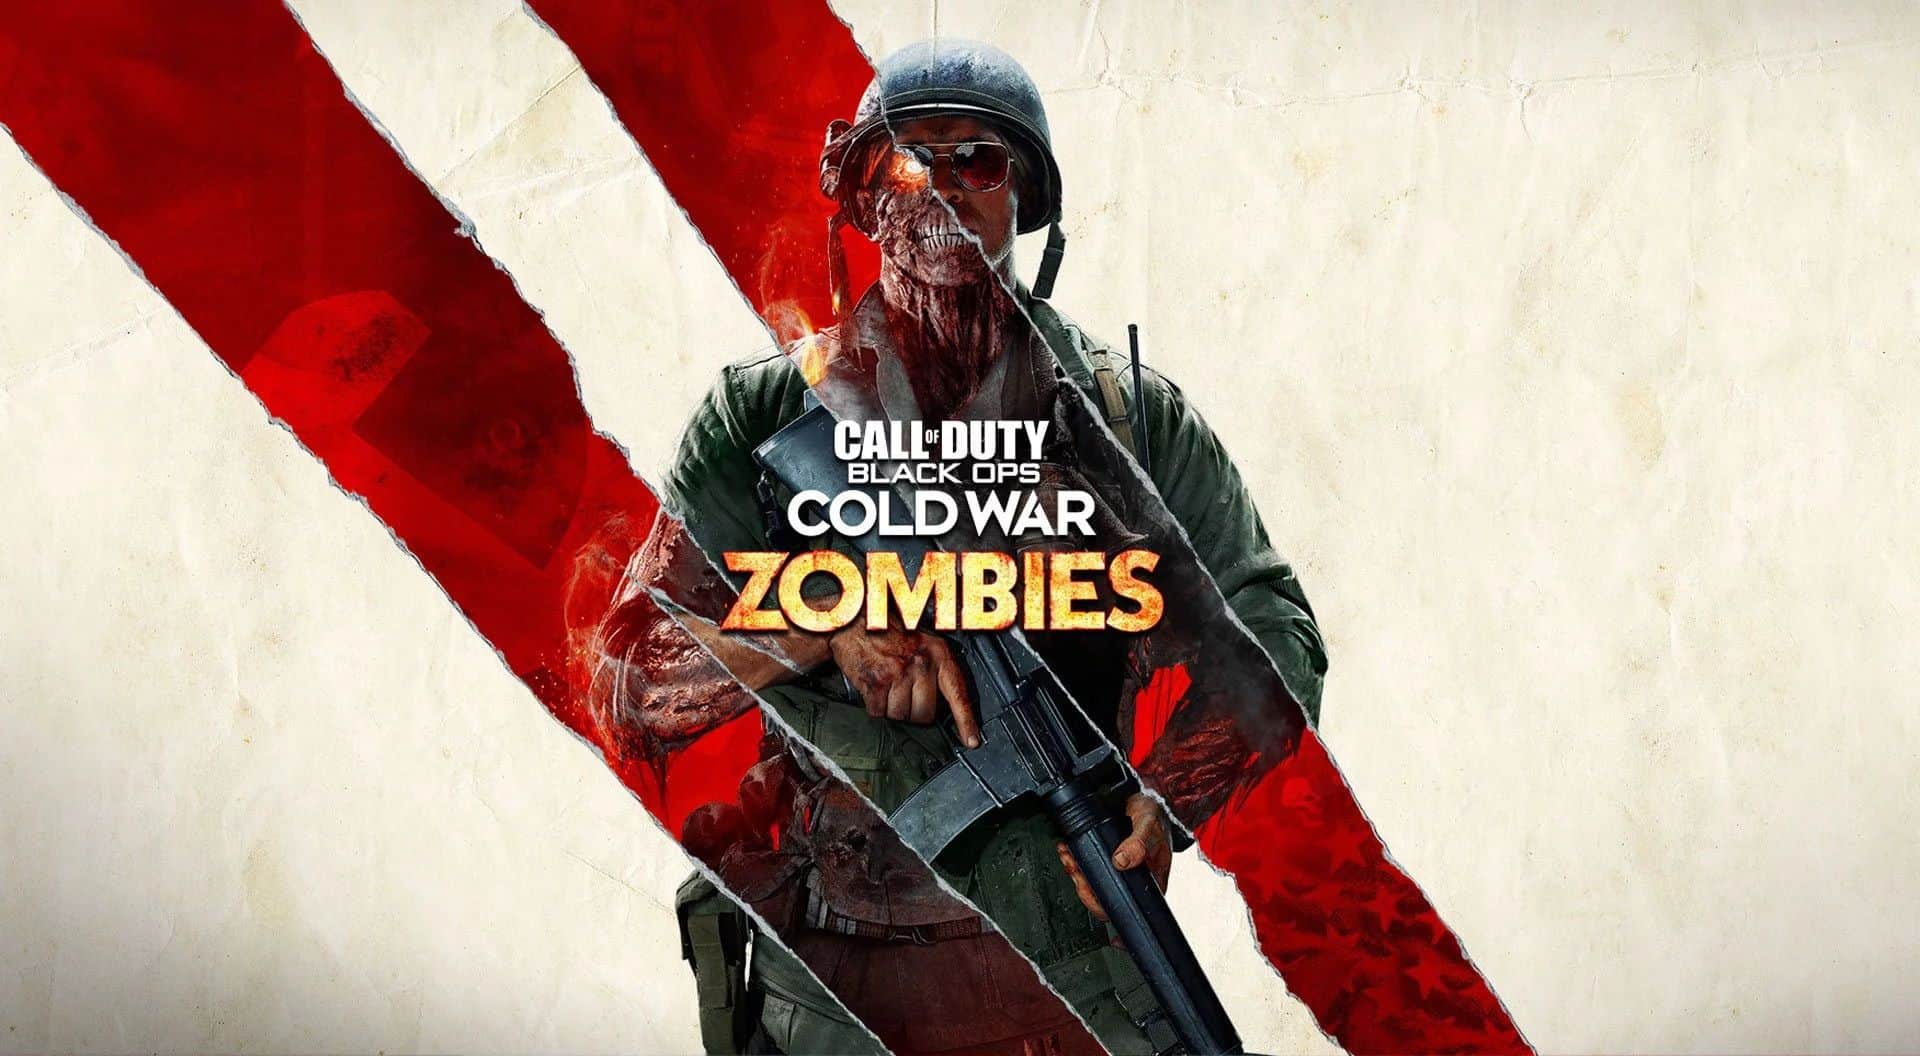 Black Ops Cold War Zombies